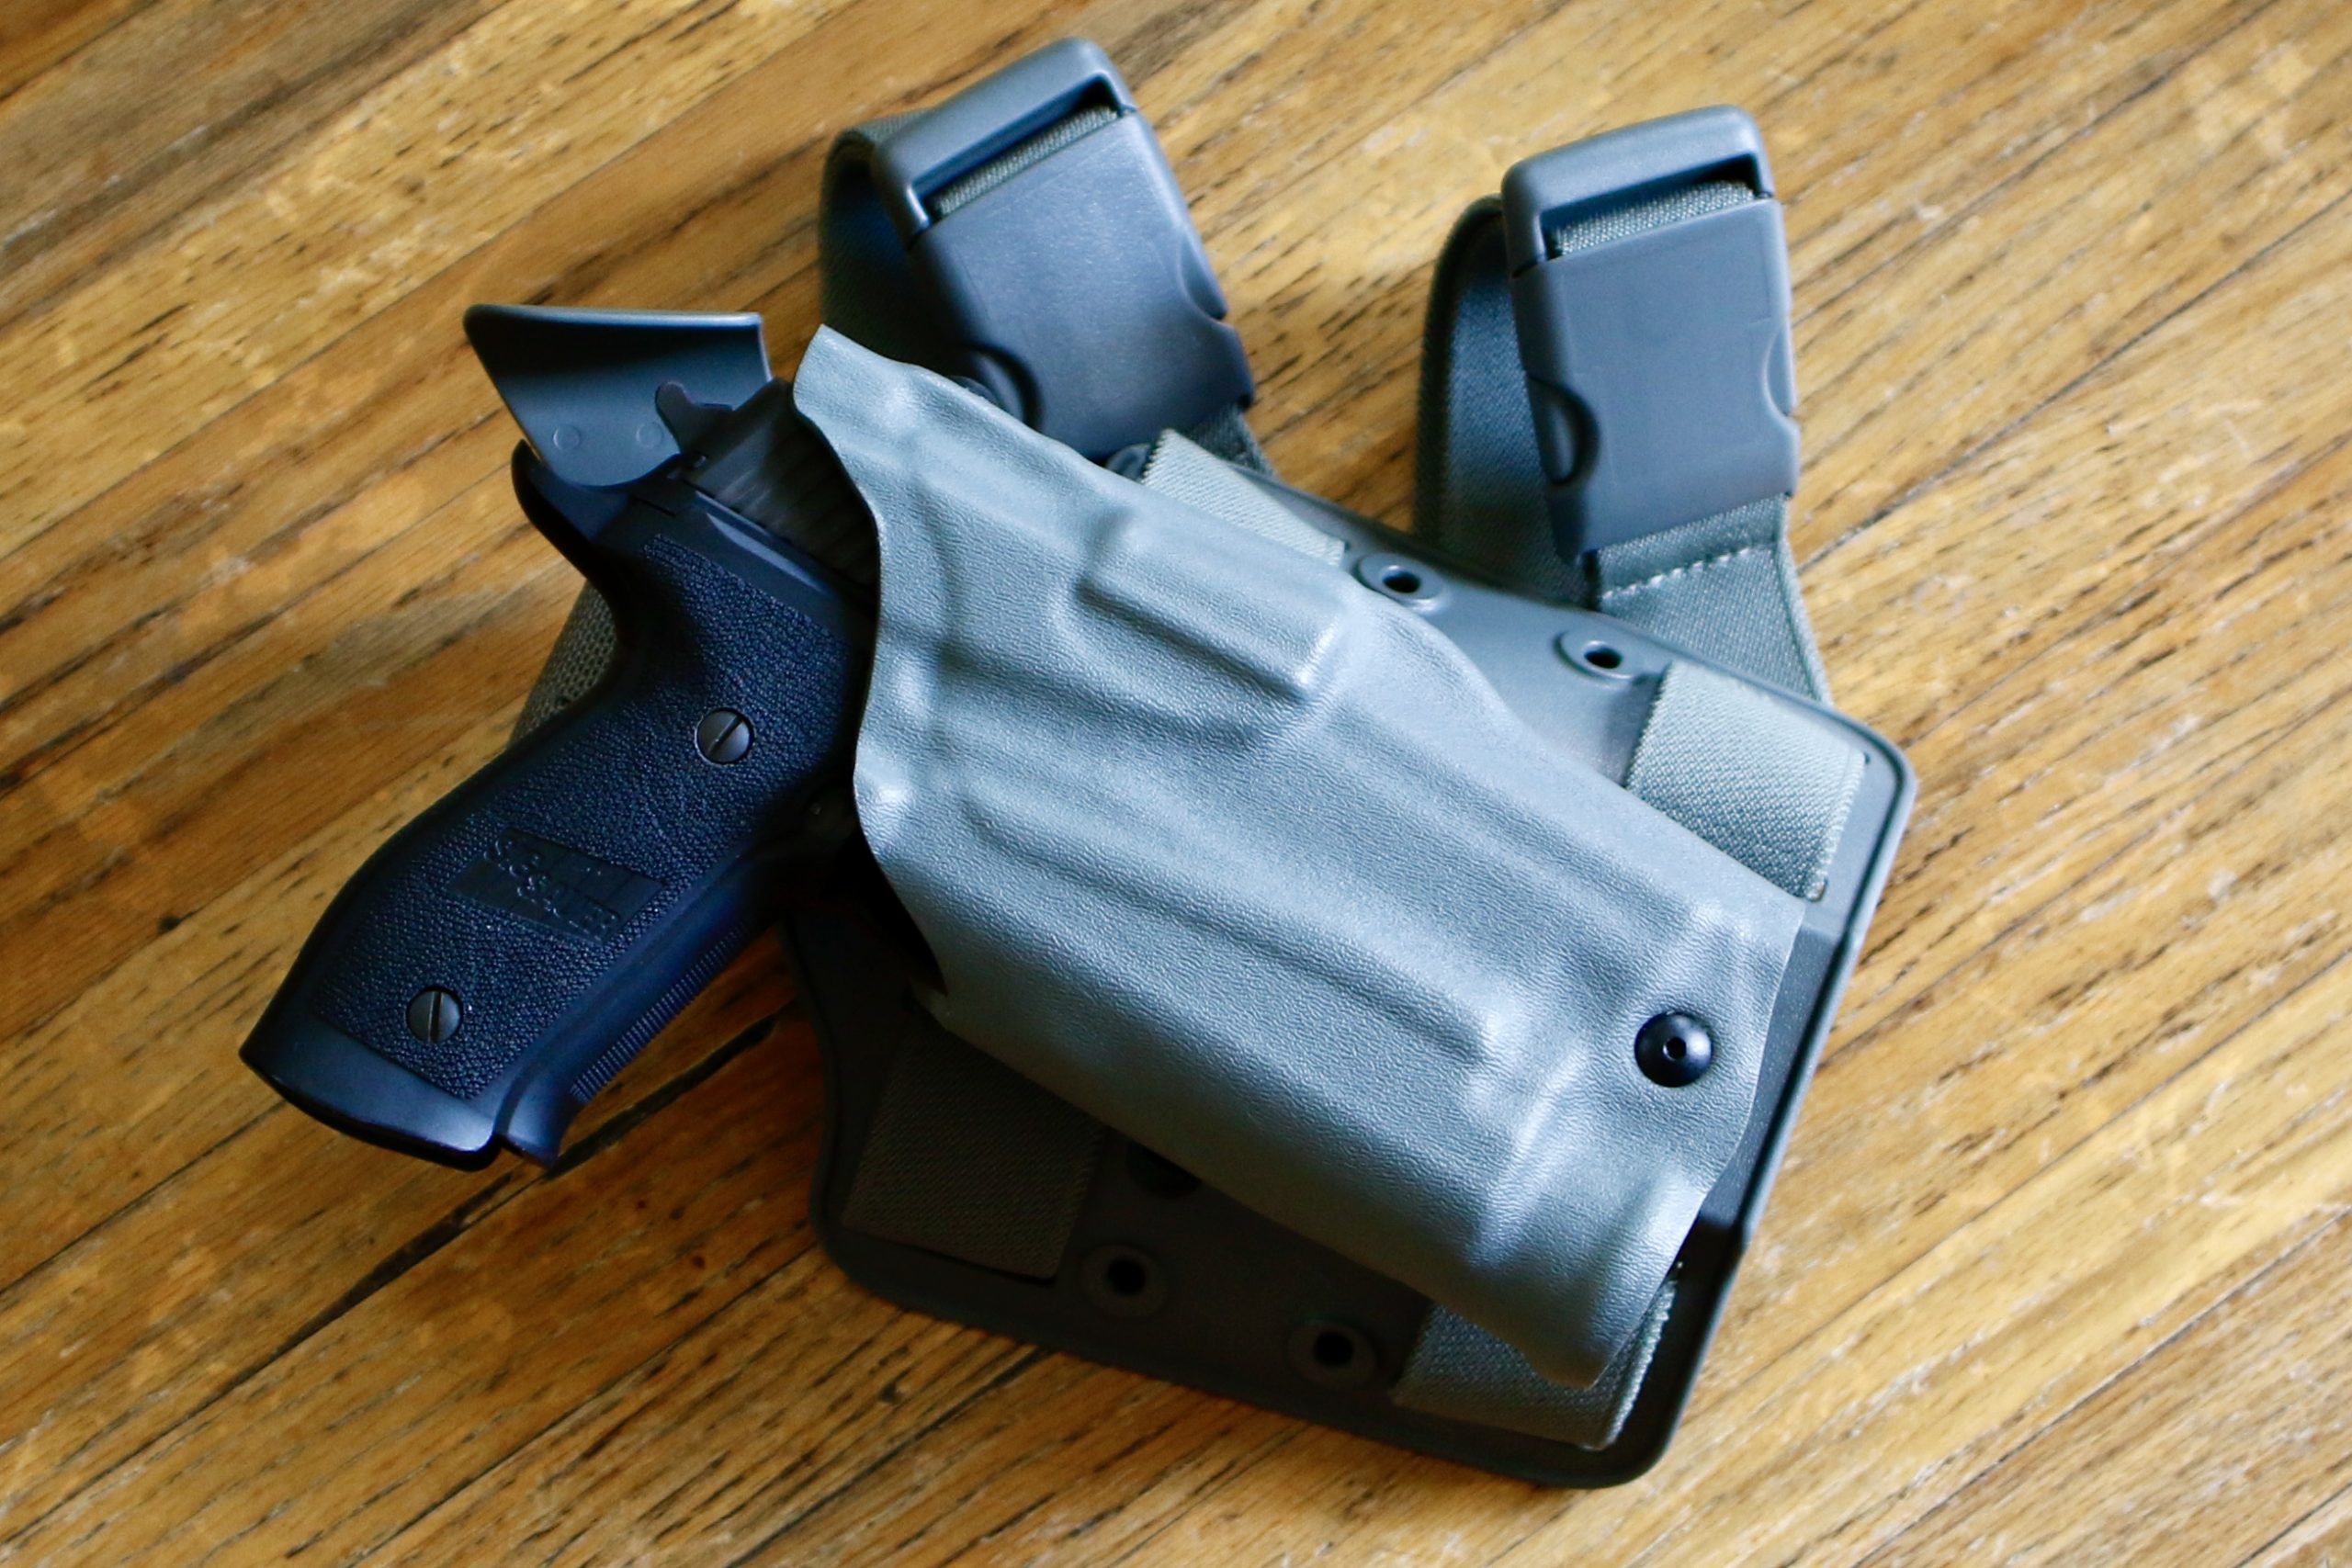 The TWM-30 will fit on a Sig P226 and both will fit into this Safariland drop-leg holster, which is built for the SureFire X300.